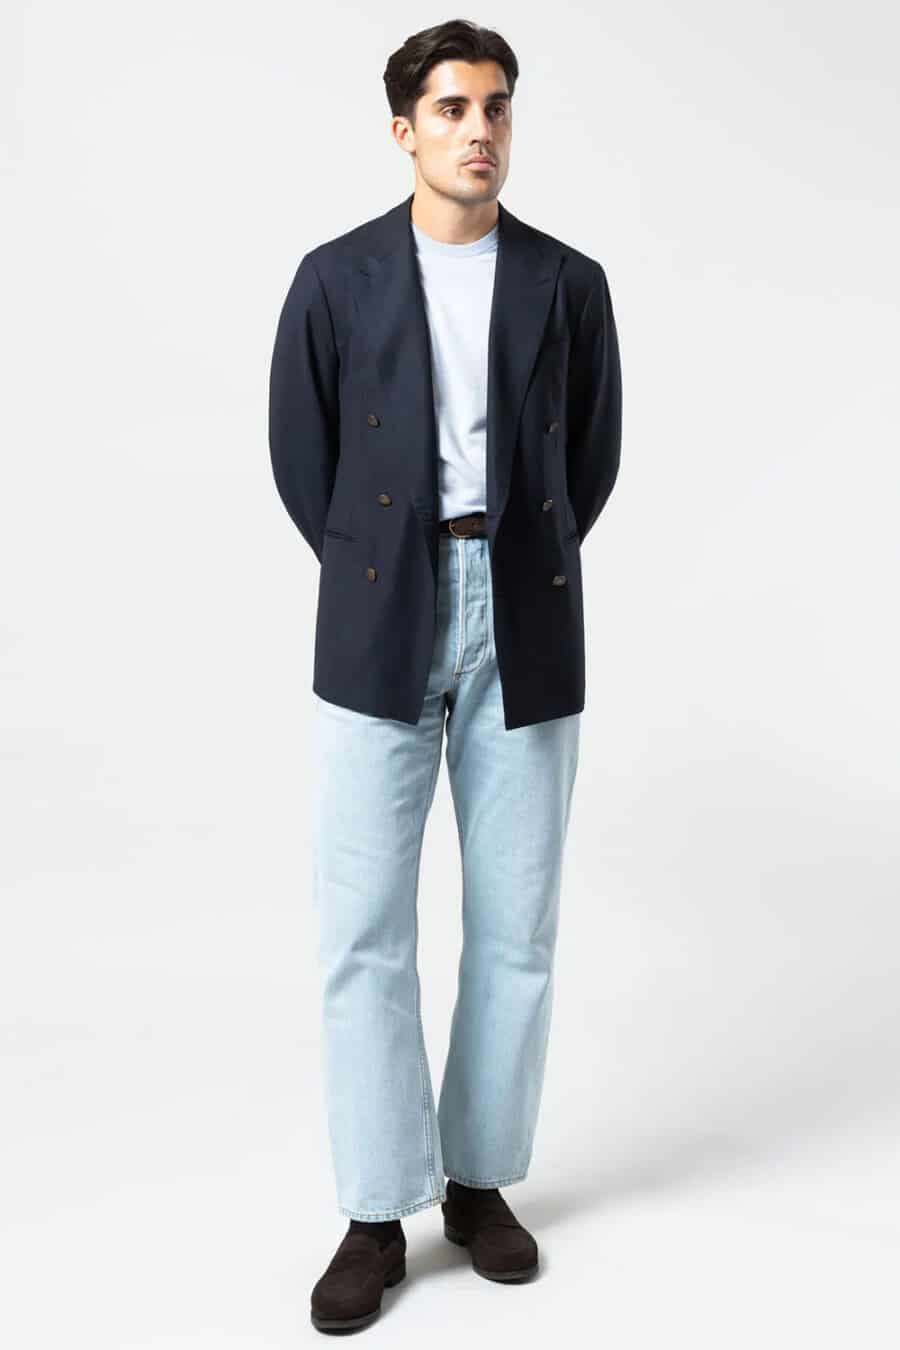 Men's light blue jeans, white T-shirt, open navy double-breasted blazer and brown suede loafers outfit